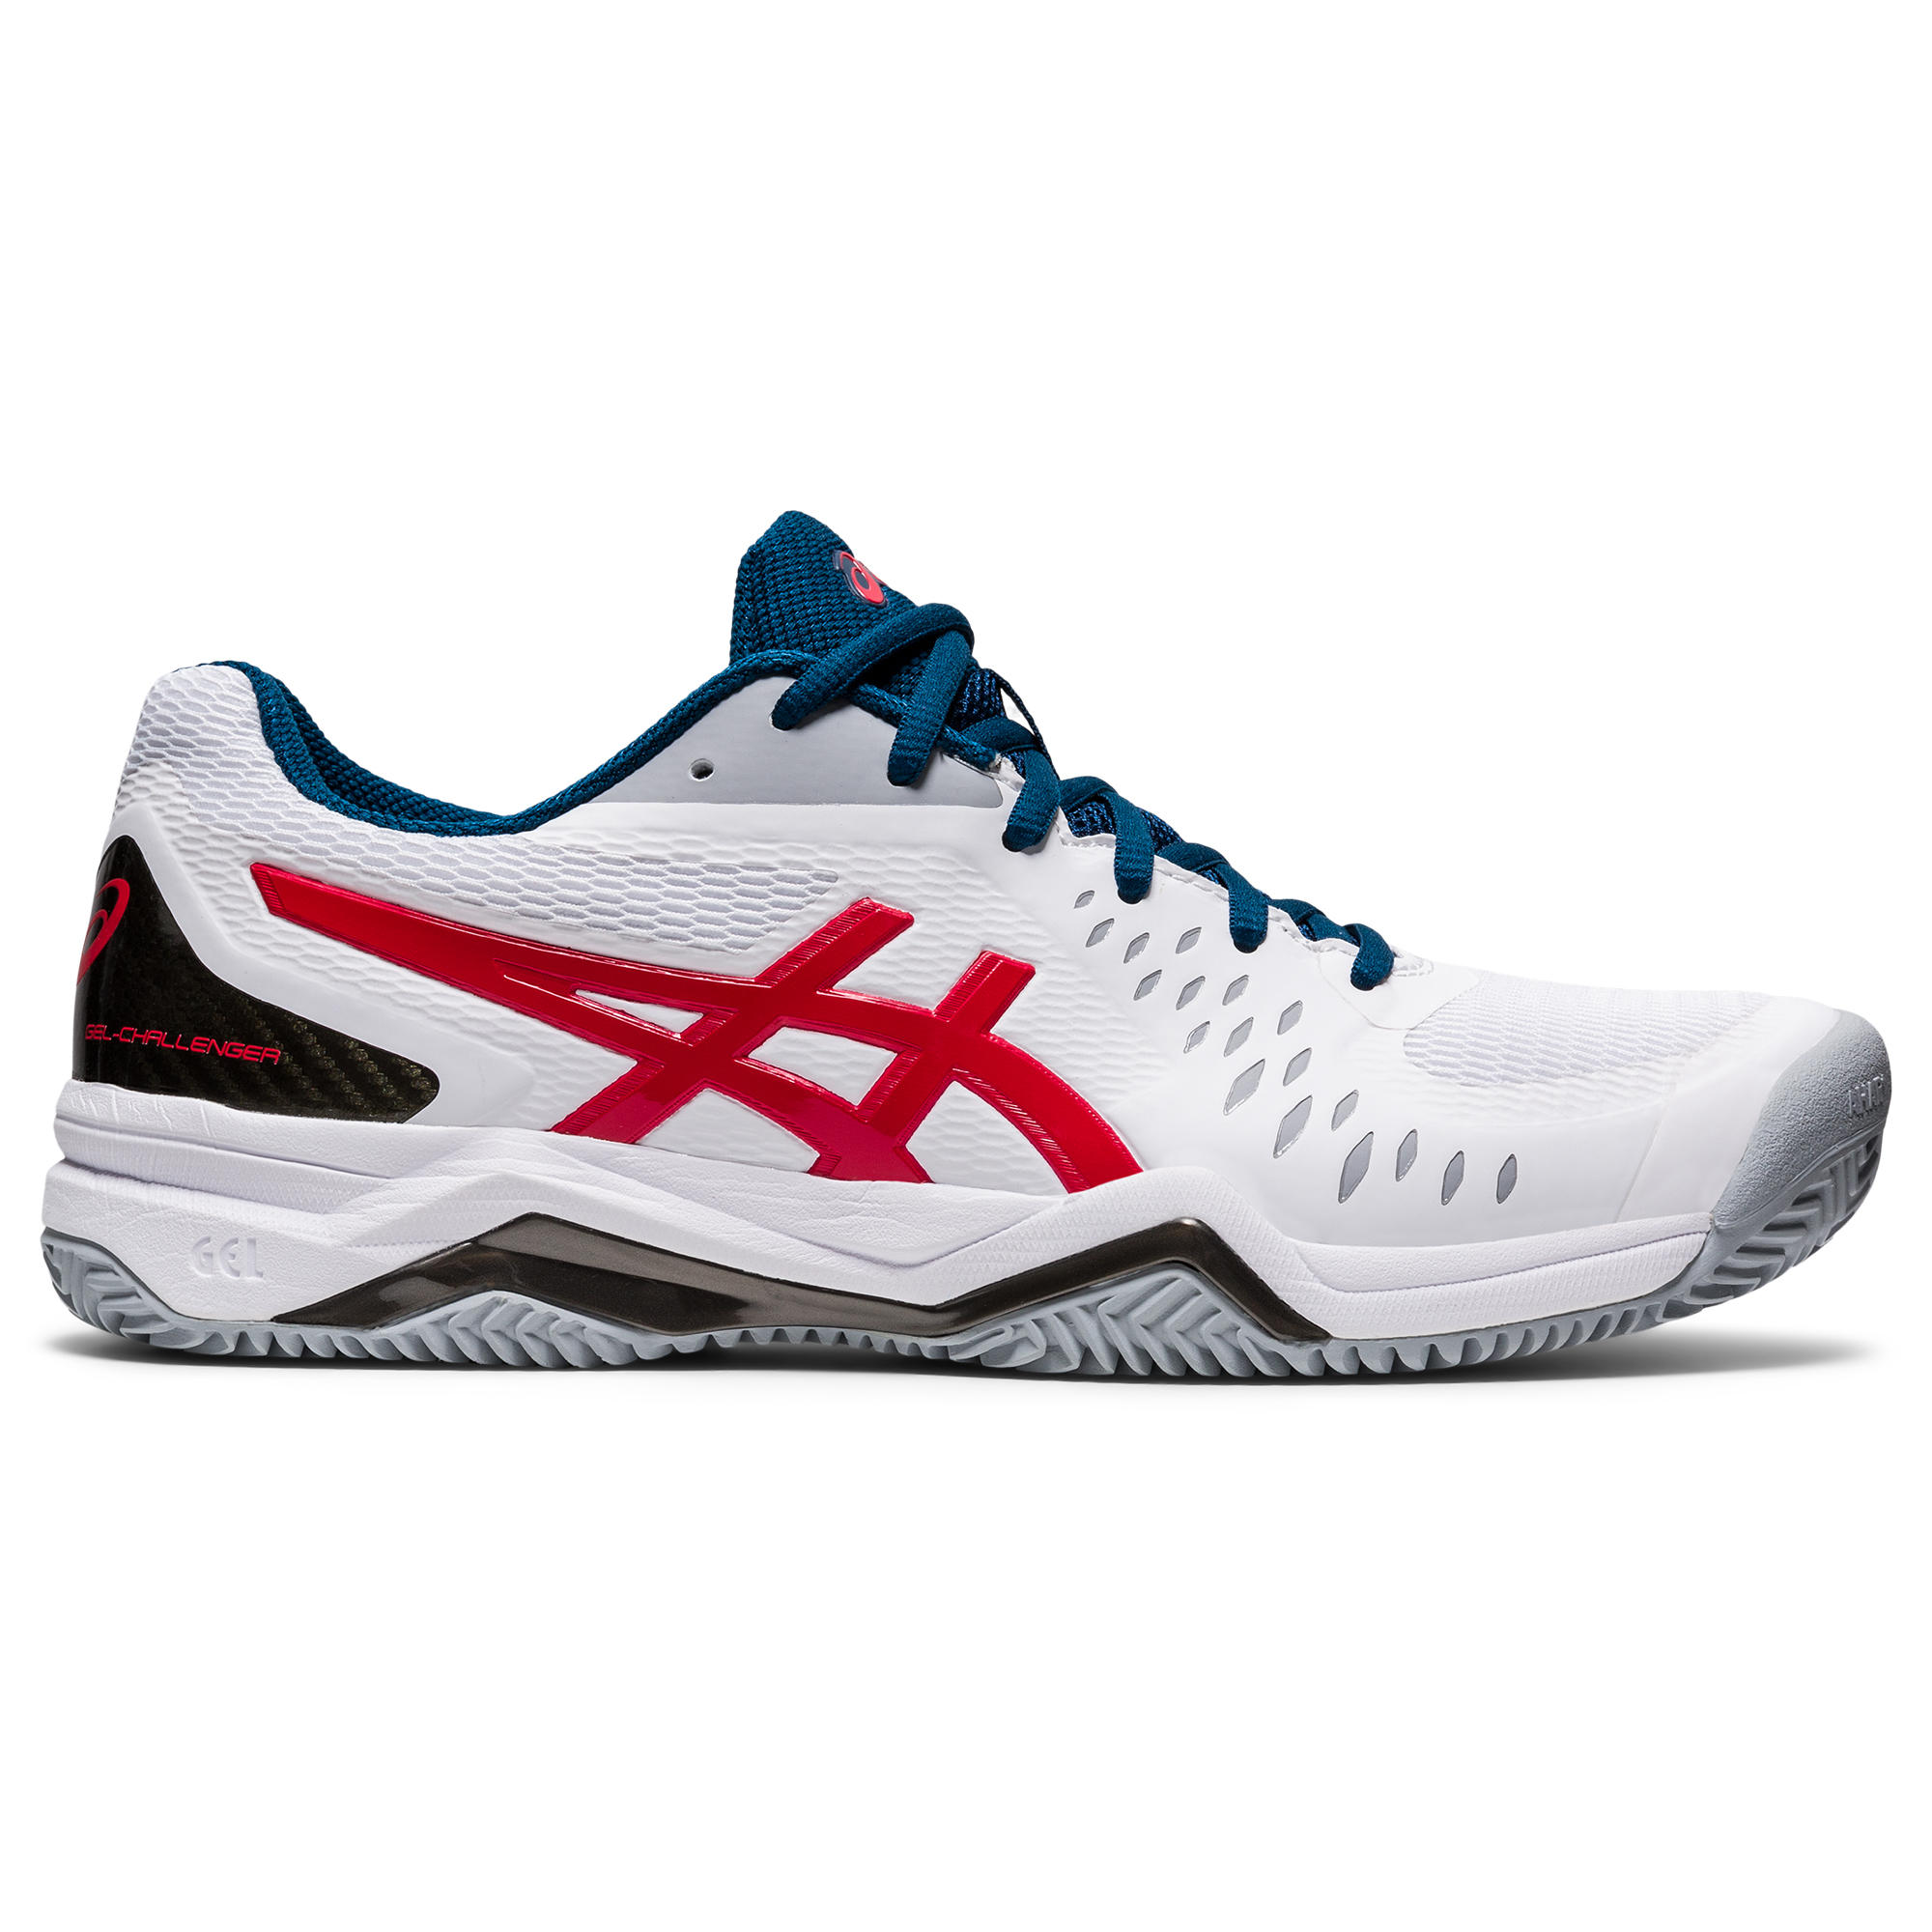 where to buy cheap asics online